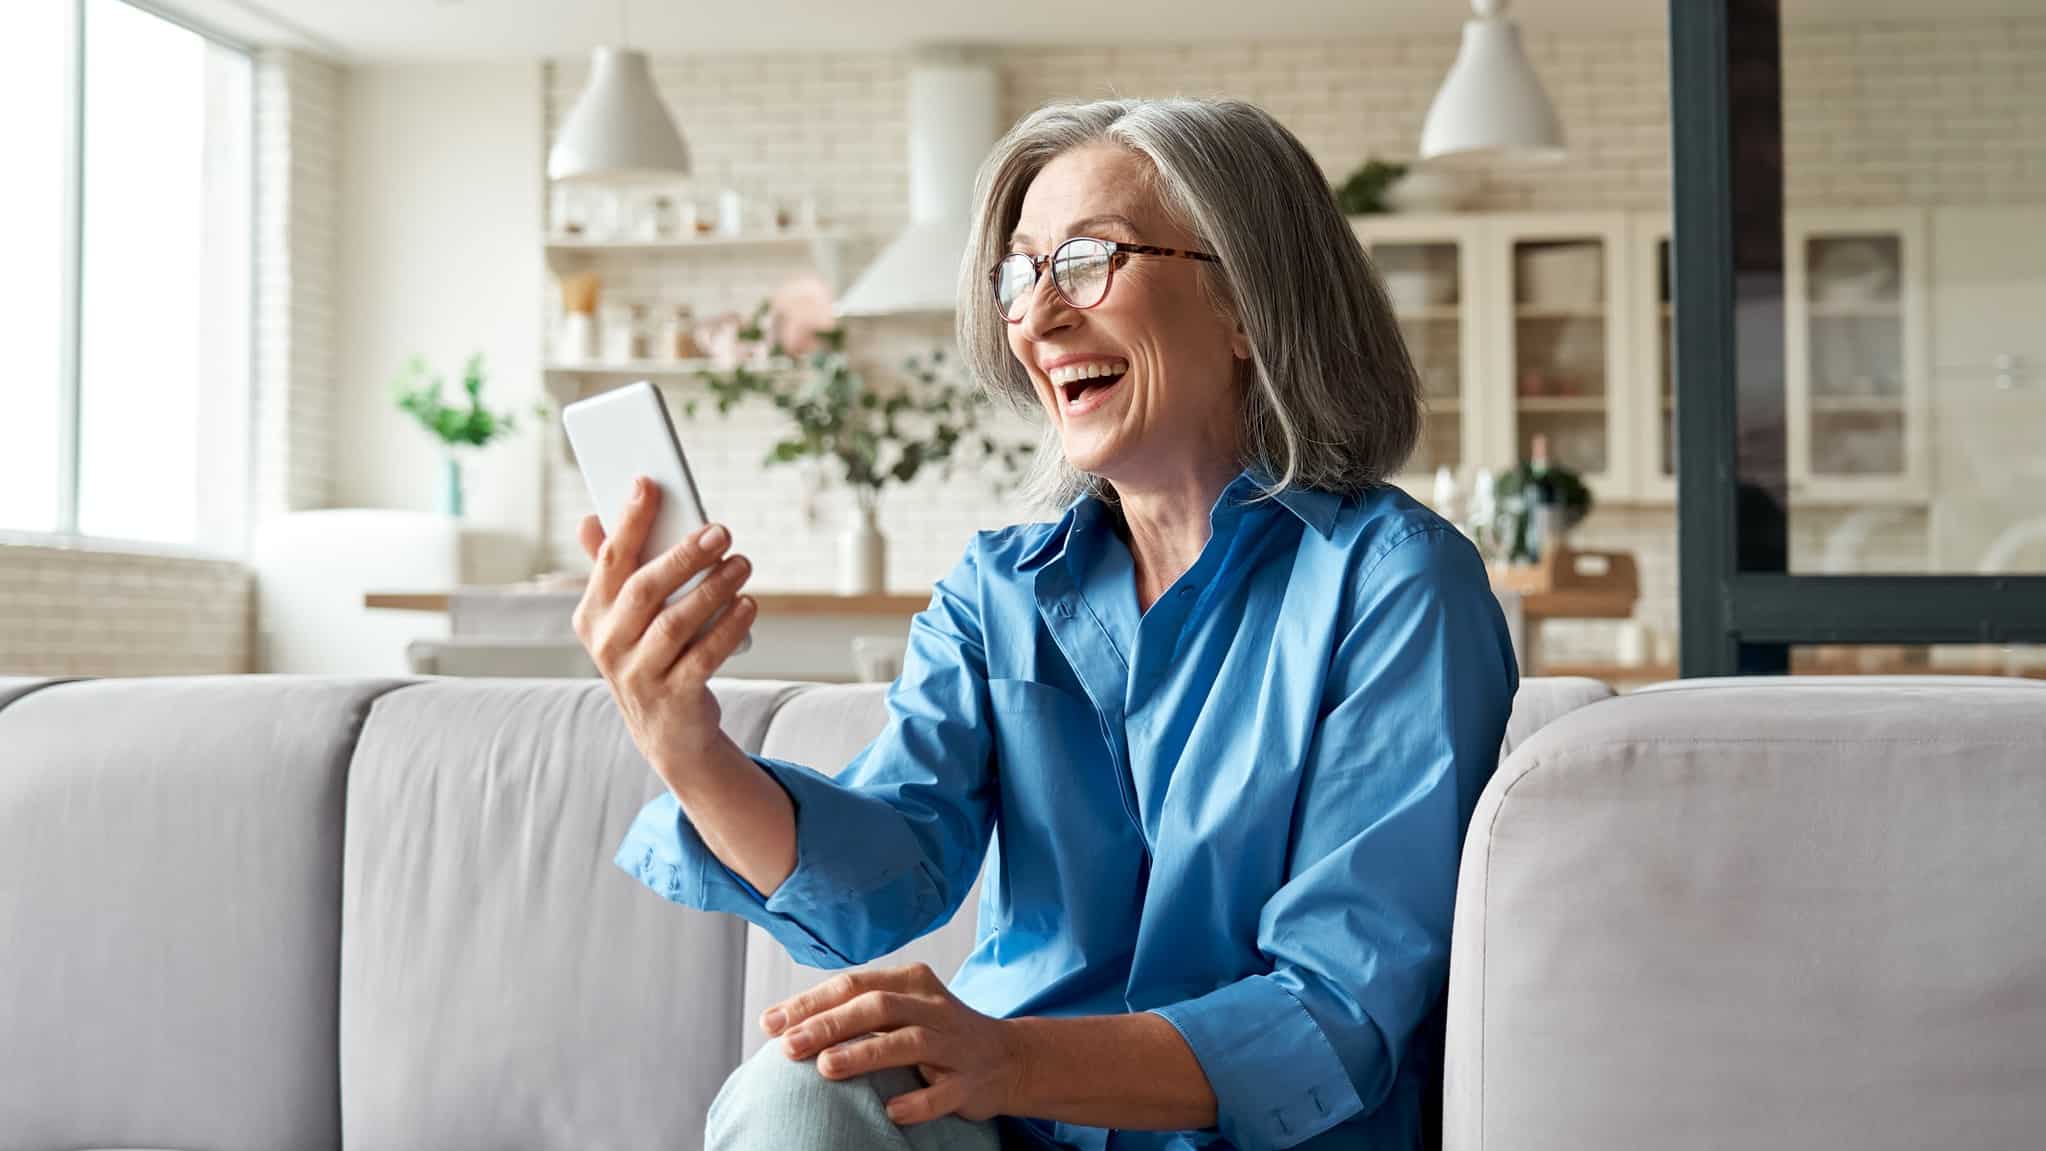 A sophisticated older lady with shoulder-length grey hair and glasses sits on her couch laughing while looking at her phone